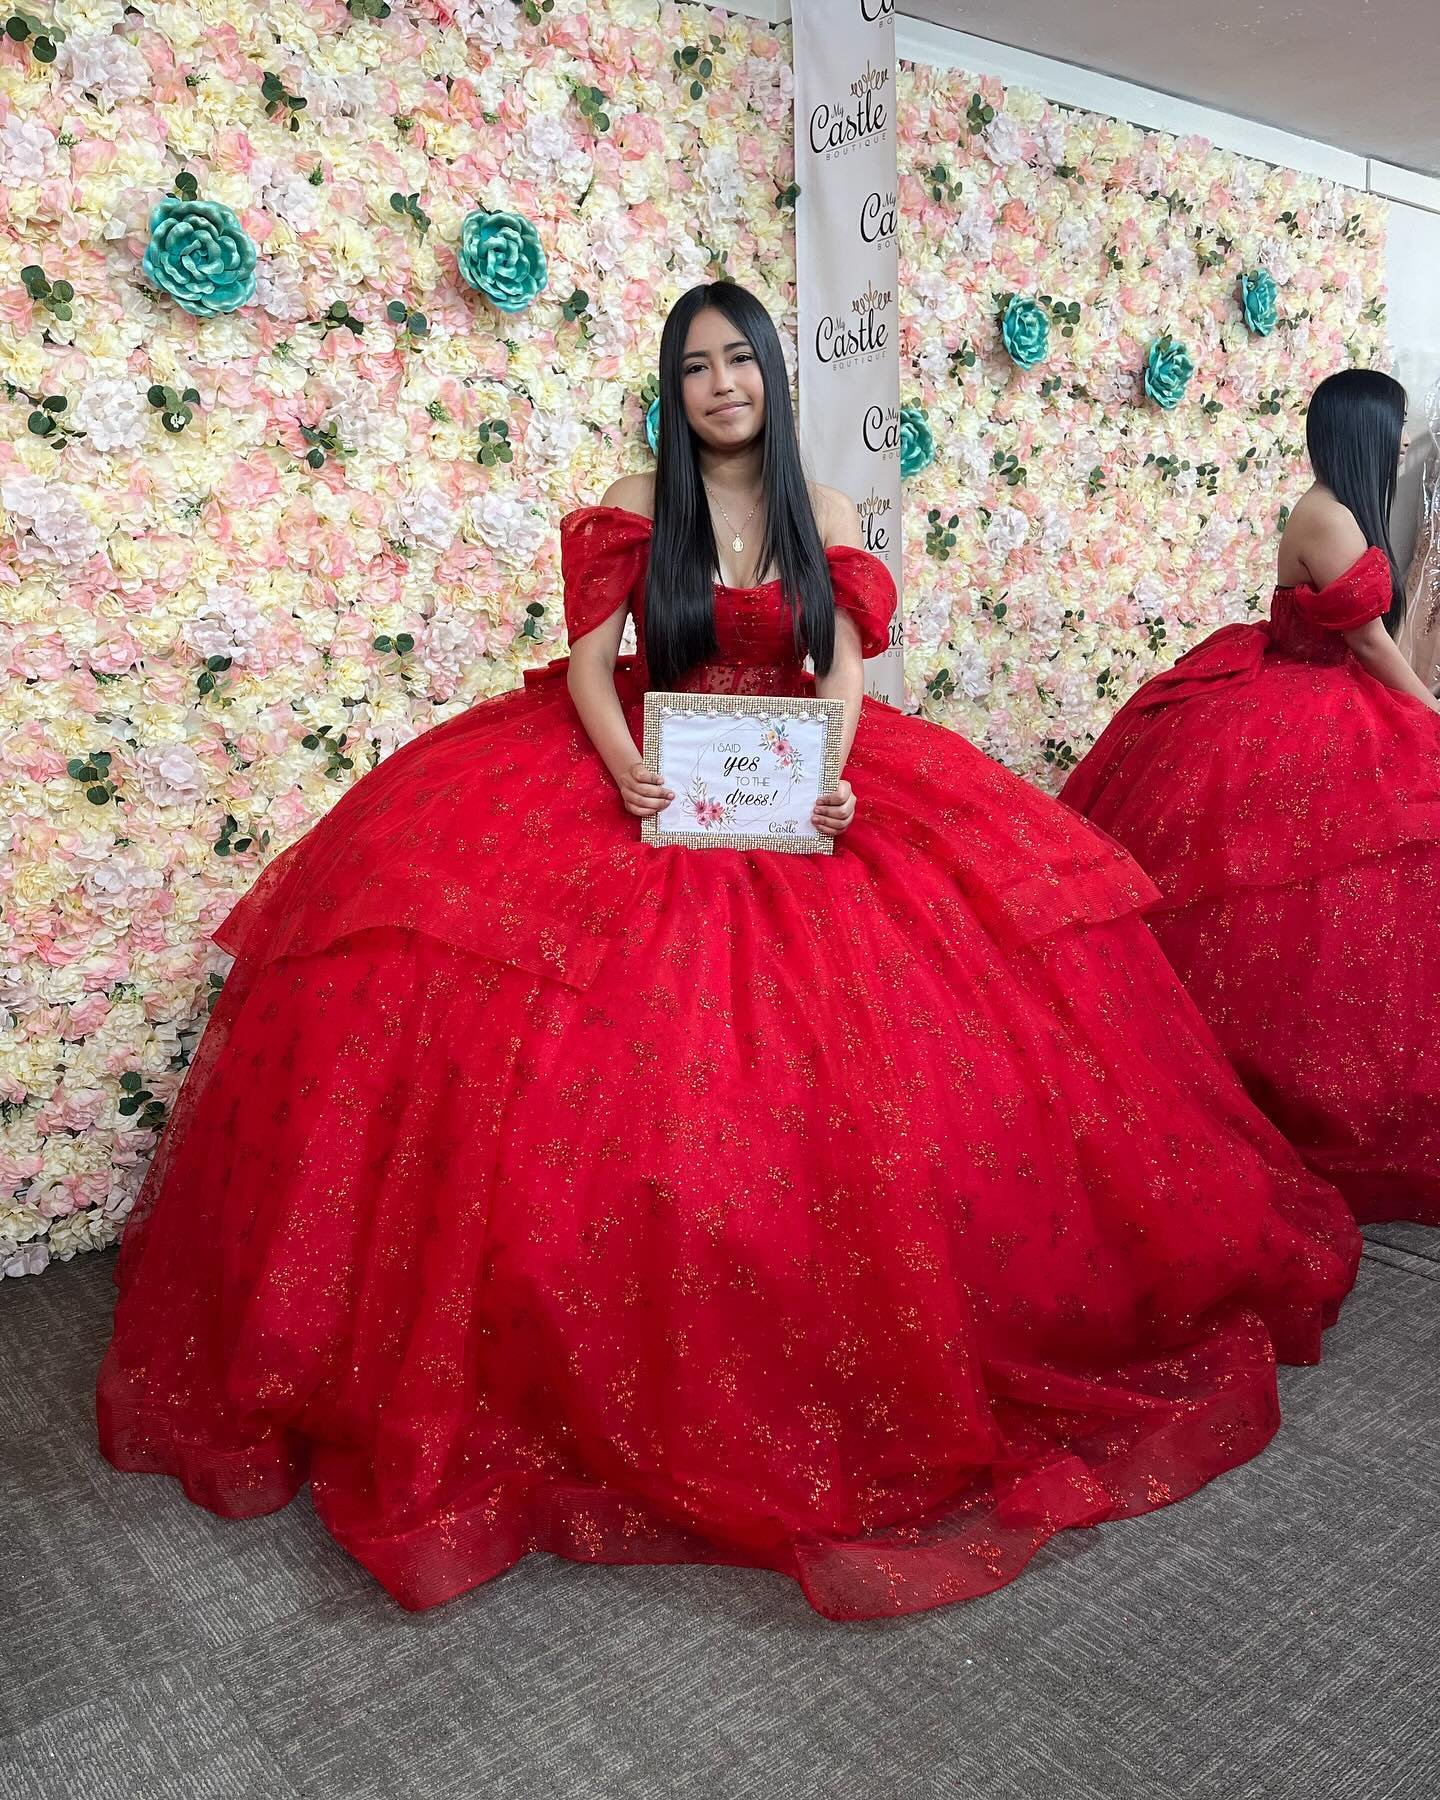 She said yes to the dress! ❣️🥰
✨
✨ ✨
✨✨
✨✨✨
✨✨✨✨
✨✨✨✨✨
✨✨✨✨
✨✨✨
✨✨
✨
#mycastleboutique #pearland #pearlandtx #quincea&ntilde;era #quinceanera #quince #ballgown #sweet15 #dresses #partydress #vestidosdequince #xv #prom #dress #quinceaneradress #quinc